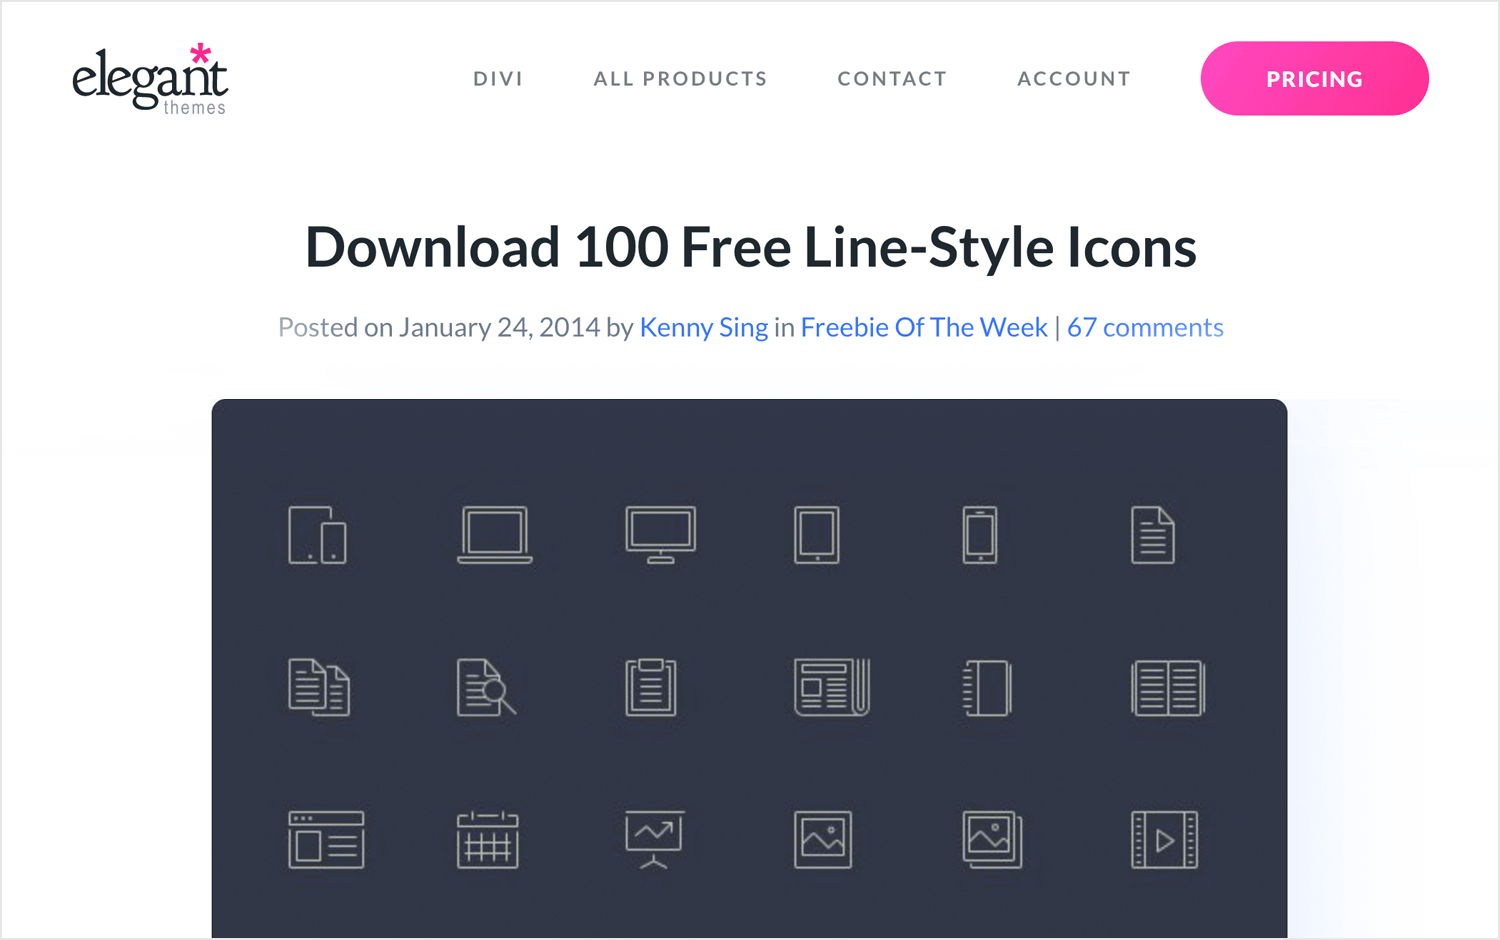 Free website icons to download - Elegant Themes